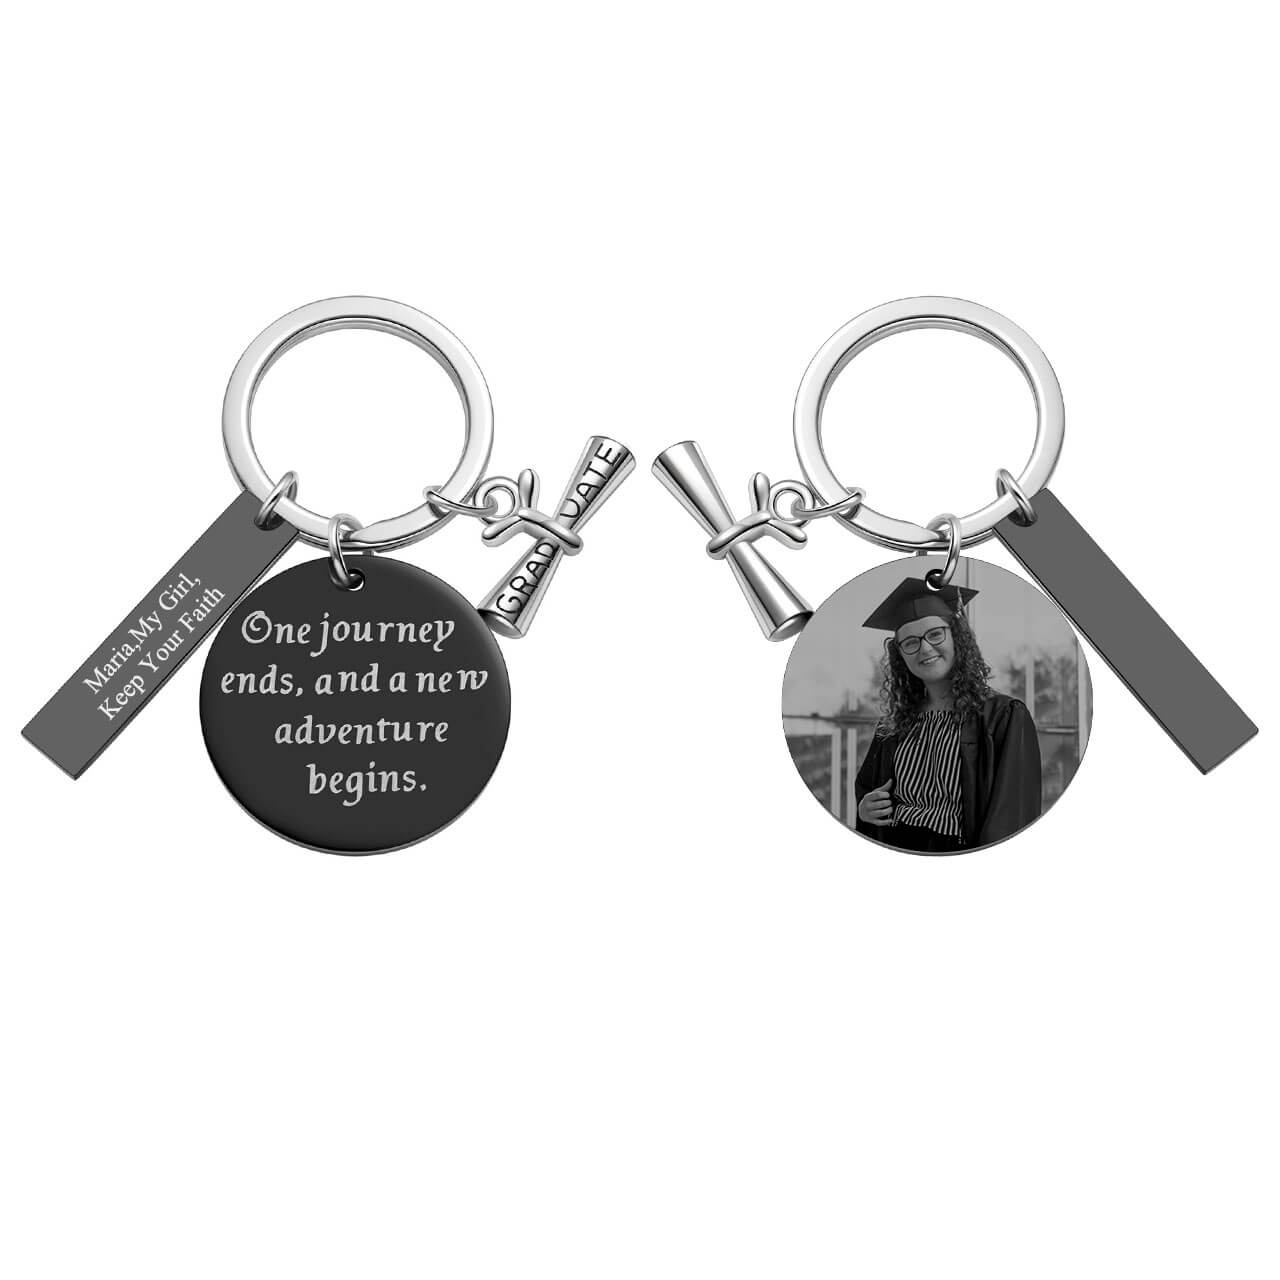 jovivi personalized photo tag keychain set for graduate students gift, jnf010806